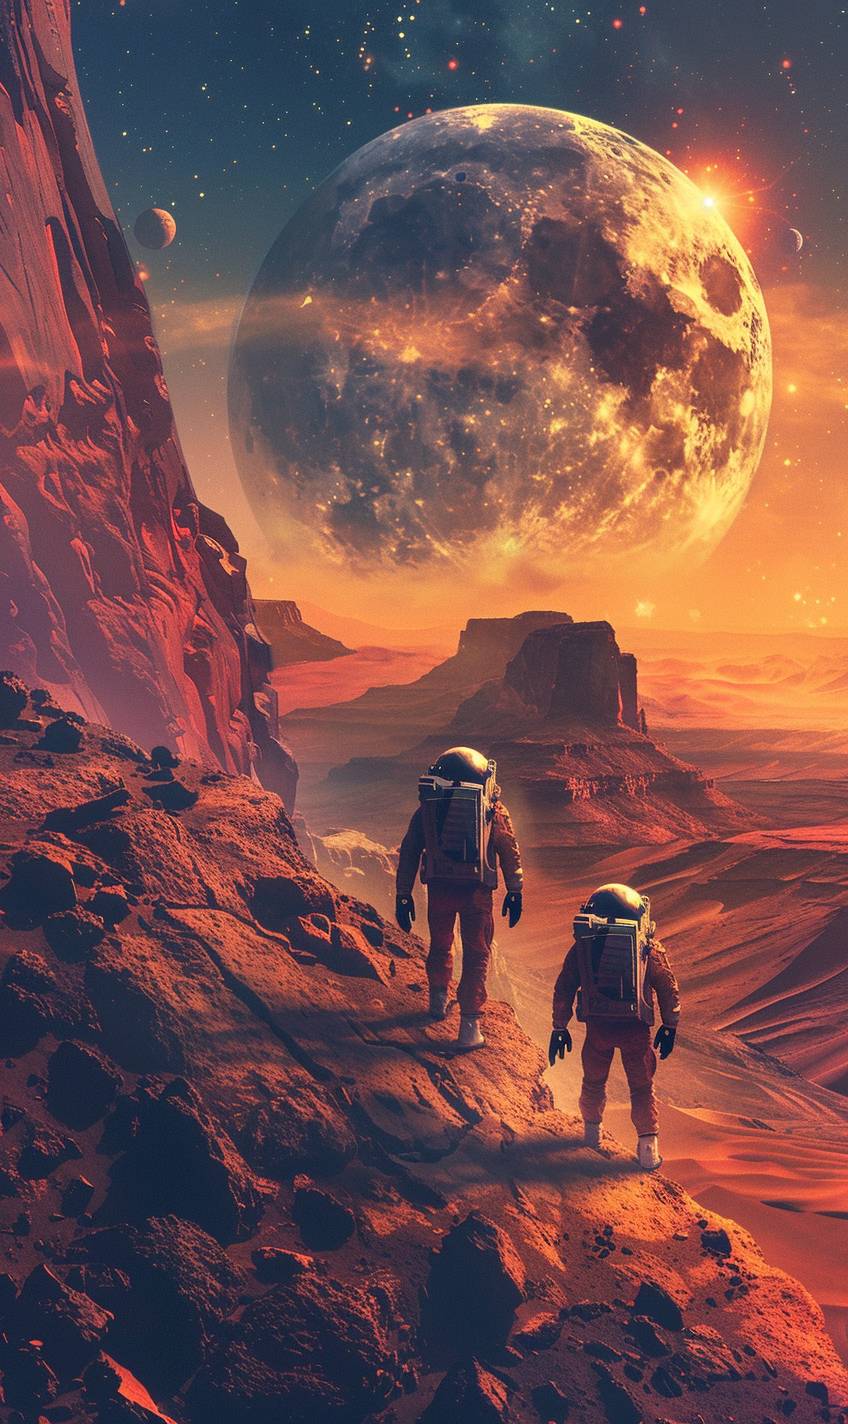 Astronauts on Mars, red alien landscape, massive sunset, giant planets in sky, steep rock formations, reflective visors, space exploration, high contrast, digital art, vivid colors, long shadows, solitary, serene, hyper-realistic watercolor painting, graphic novel style